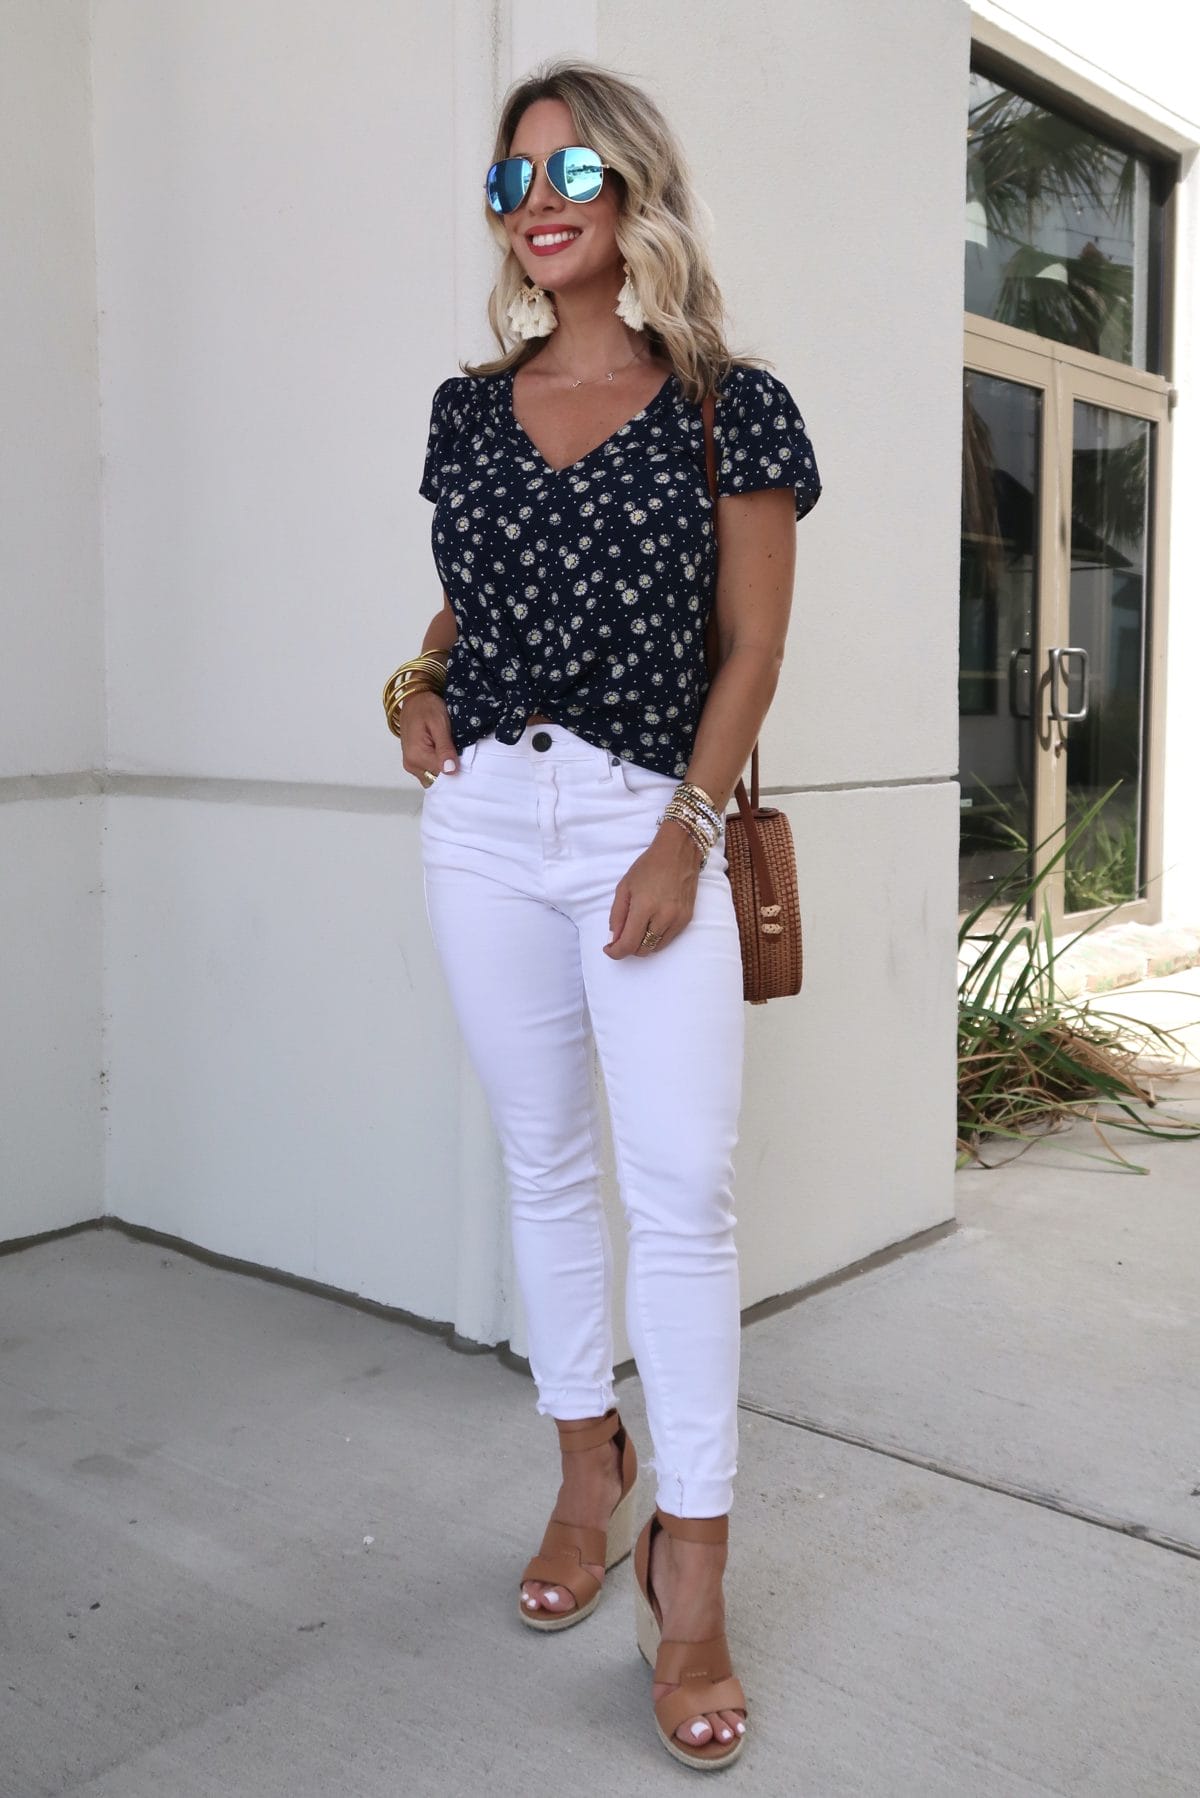 New Summer Styles, Nordstrom and Gibson, Daisy Print Top, Kut from Kloth Jeans, Wedges, Woven Bag, Blue Sunglasses 